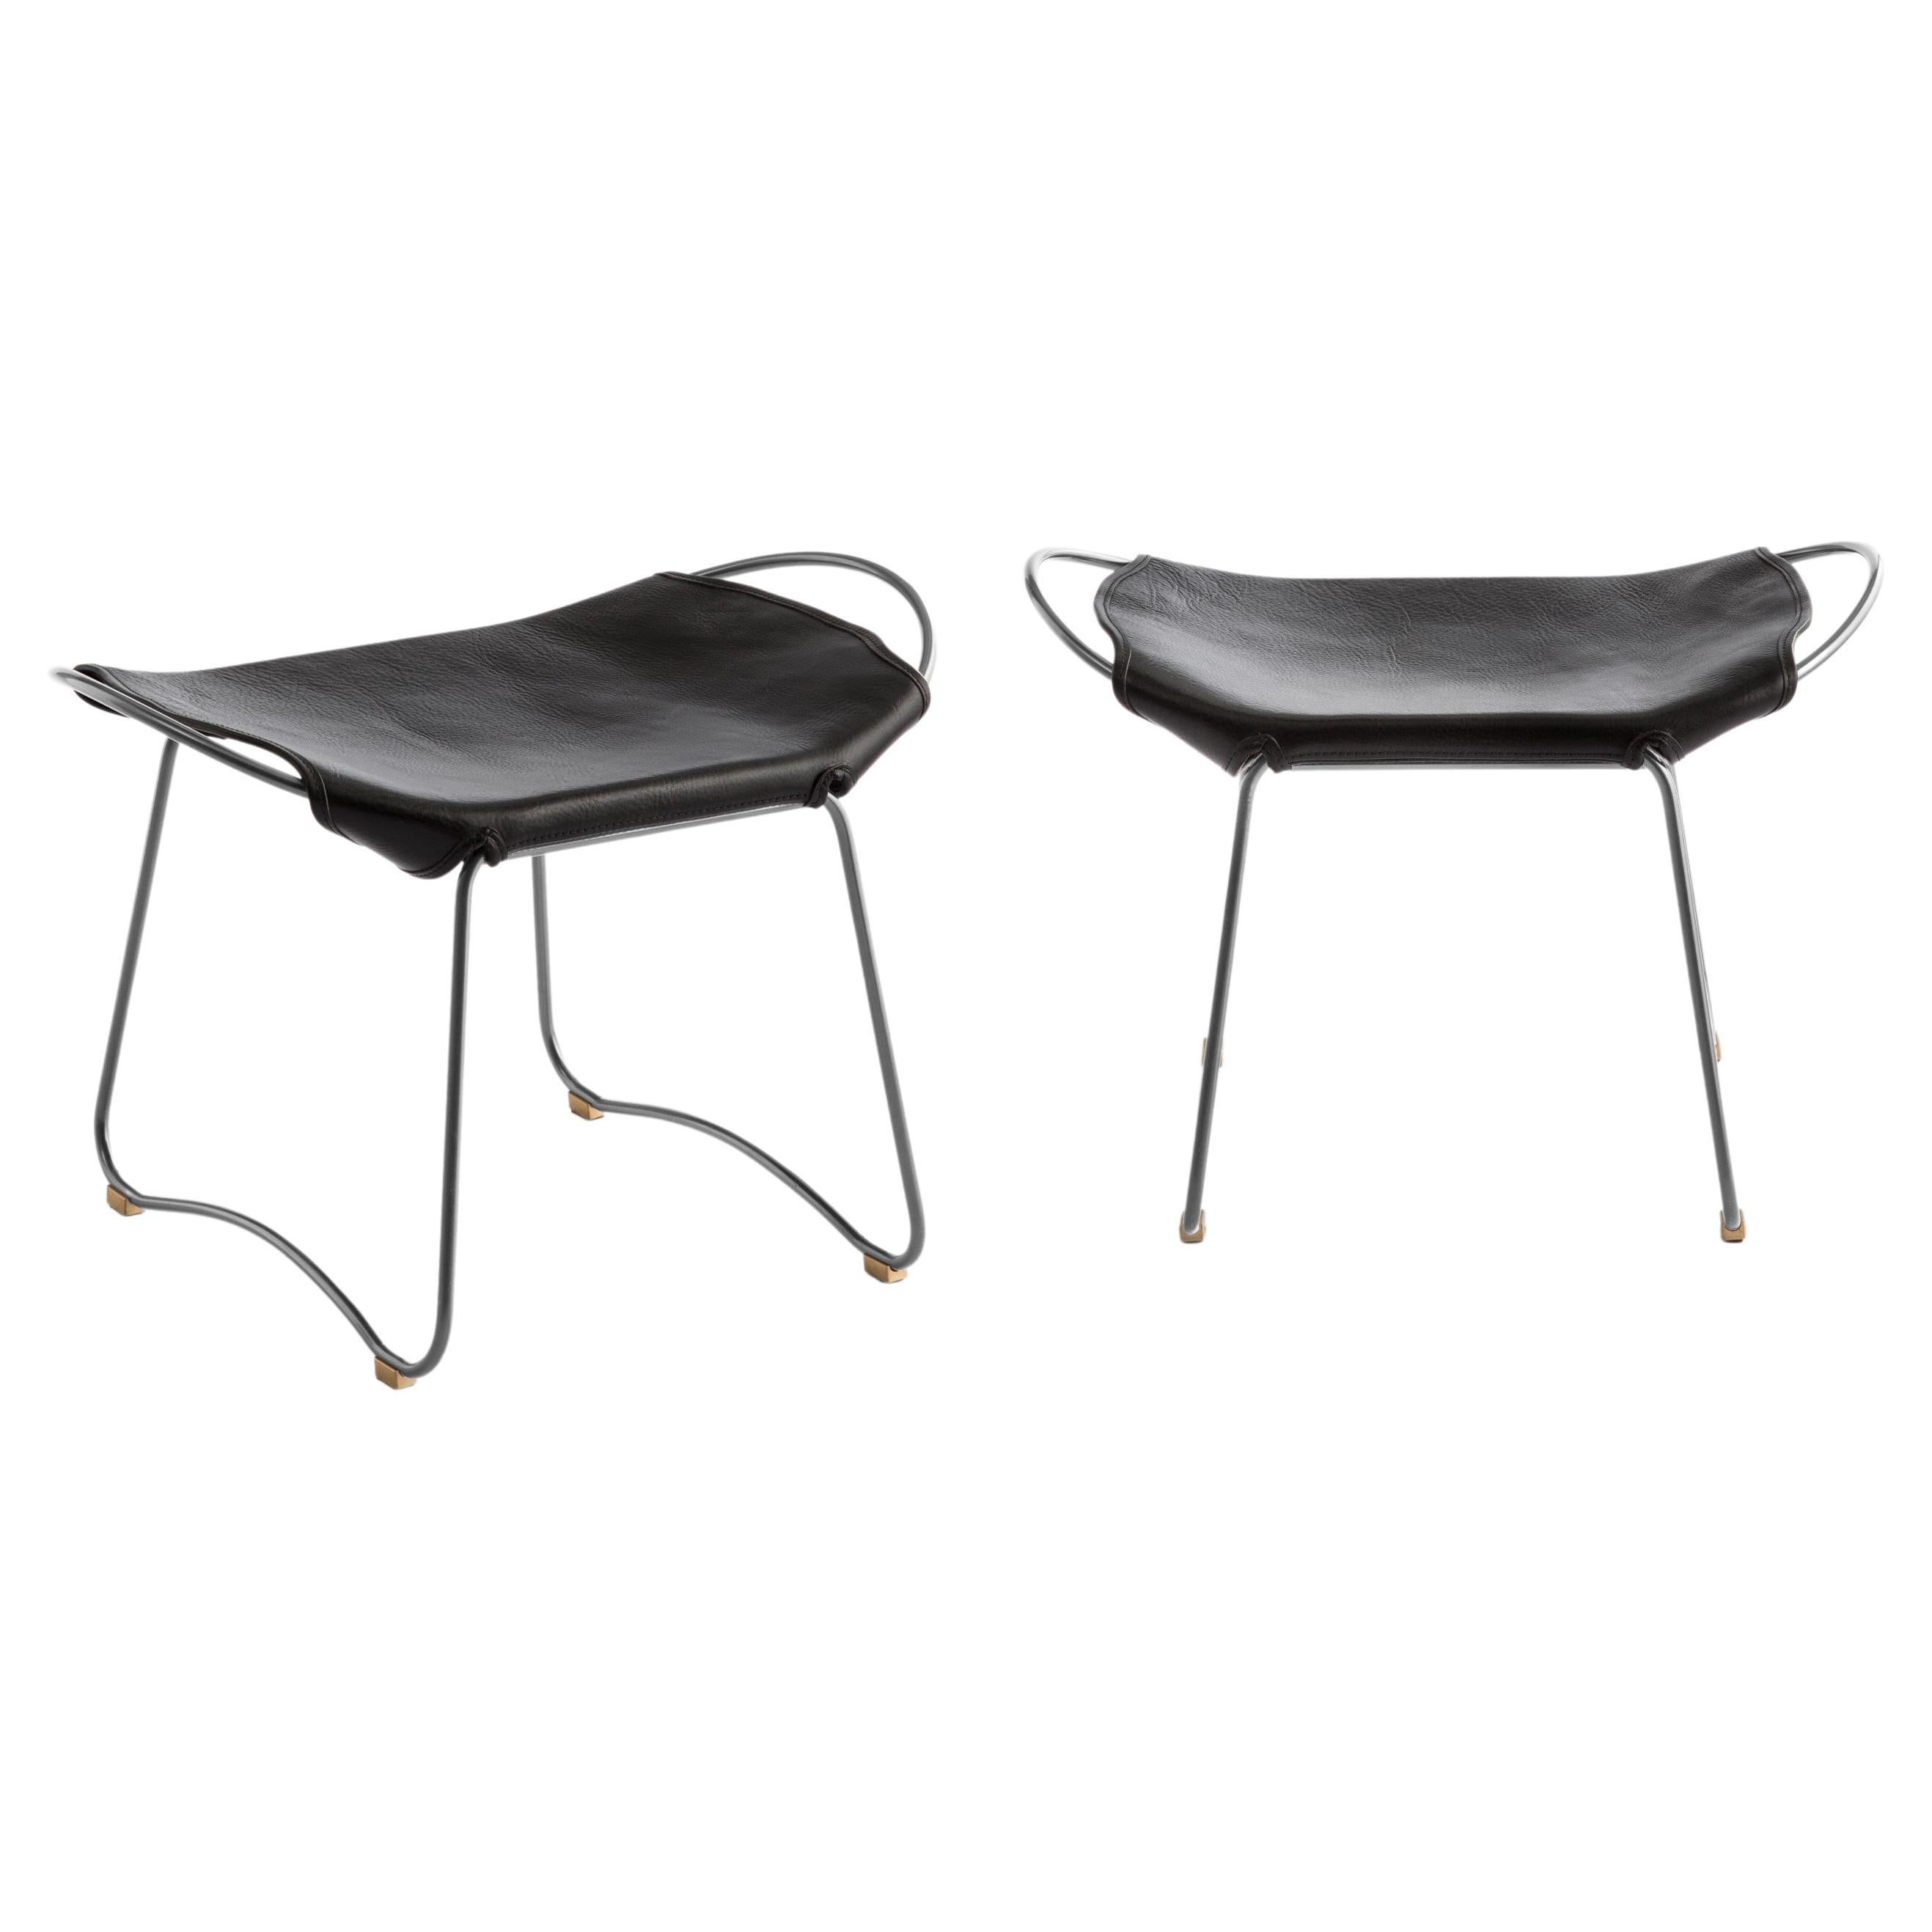 Set of 2 Footstool Silver Steel & Black Saddle Leather Organic Style Auction